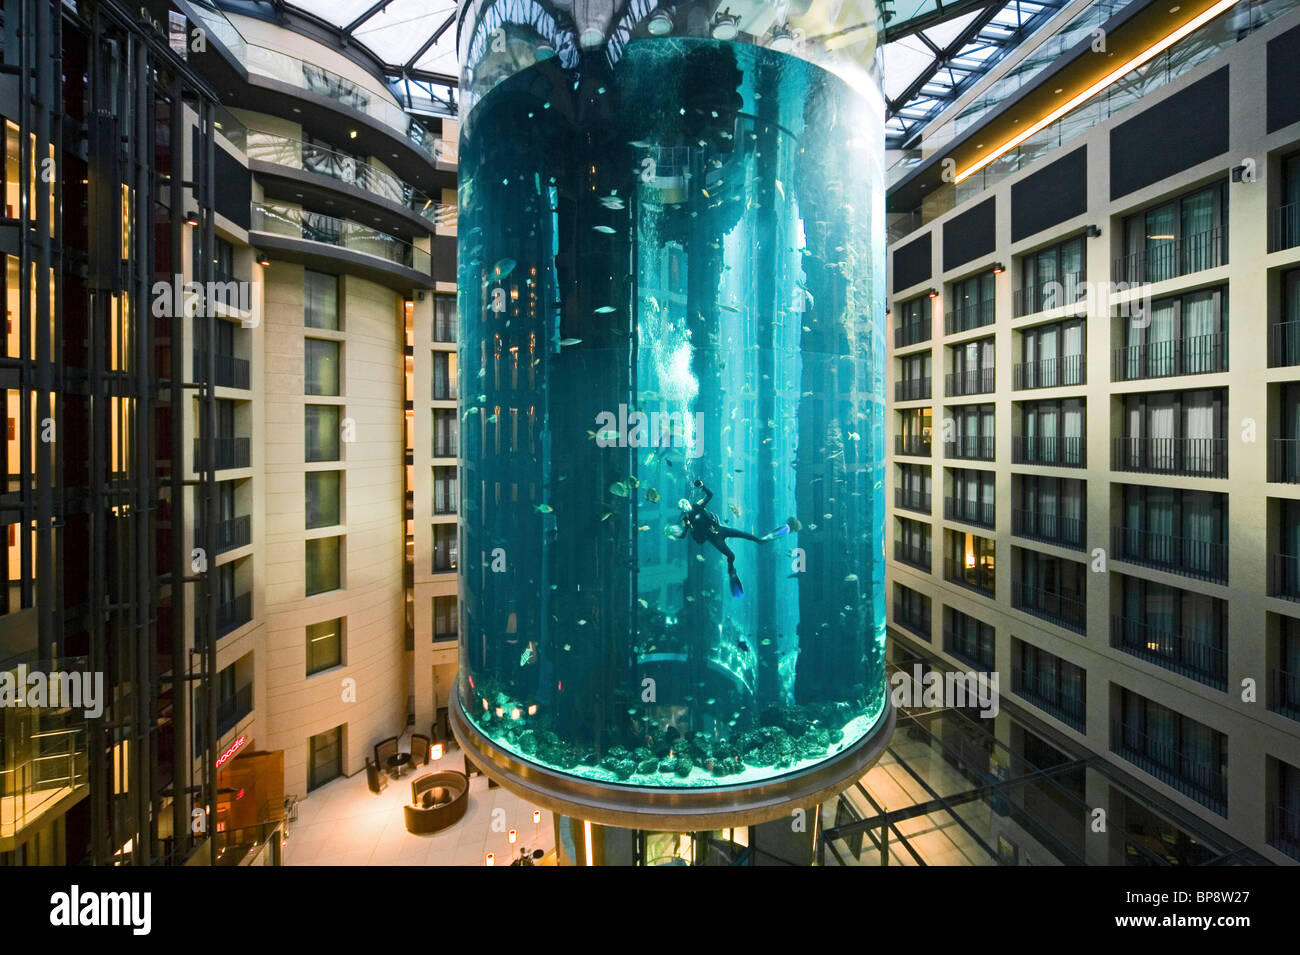 the 5 star Radisson SAS Hotel features the world's largest cylindrical aquarium. entrance to Aqua Dom, a diver cleans the tank, Stock Photo